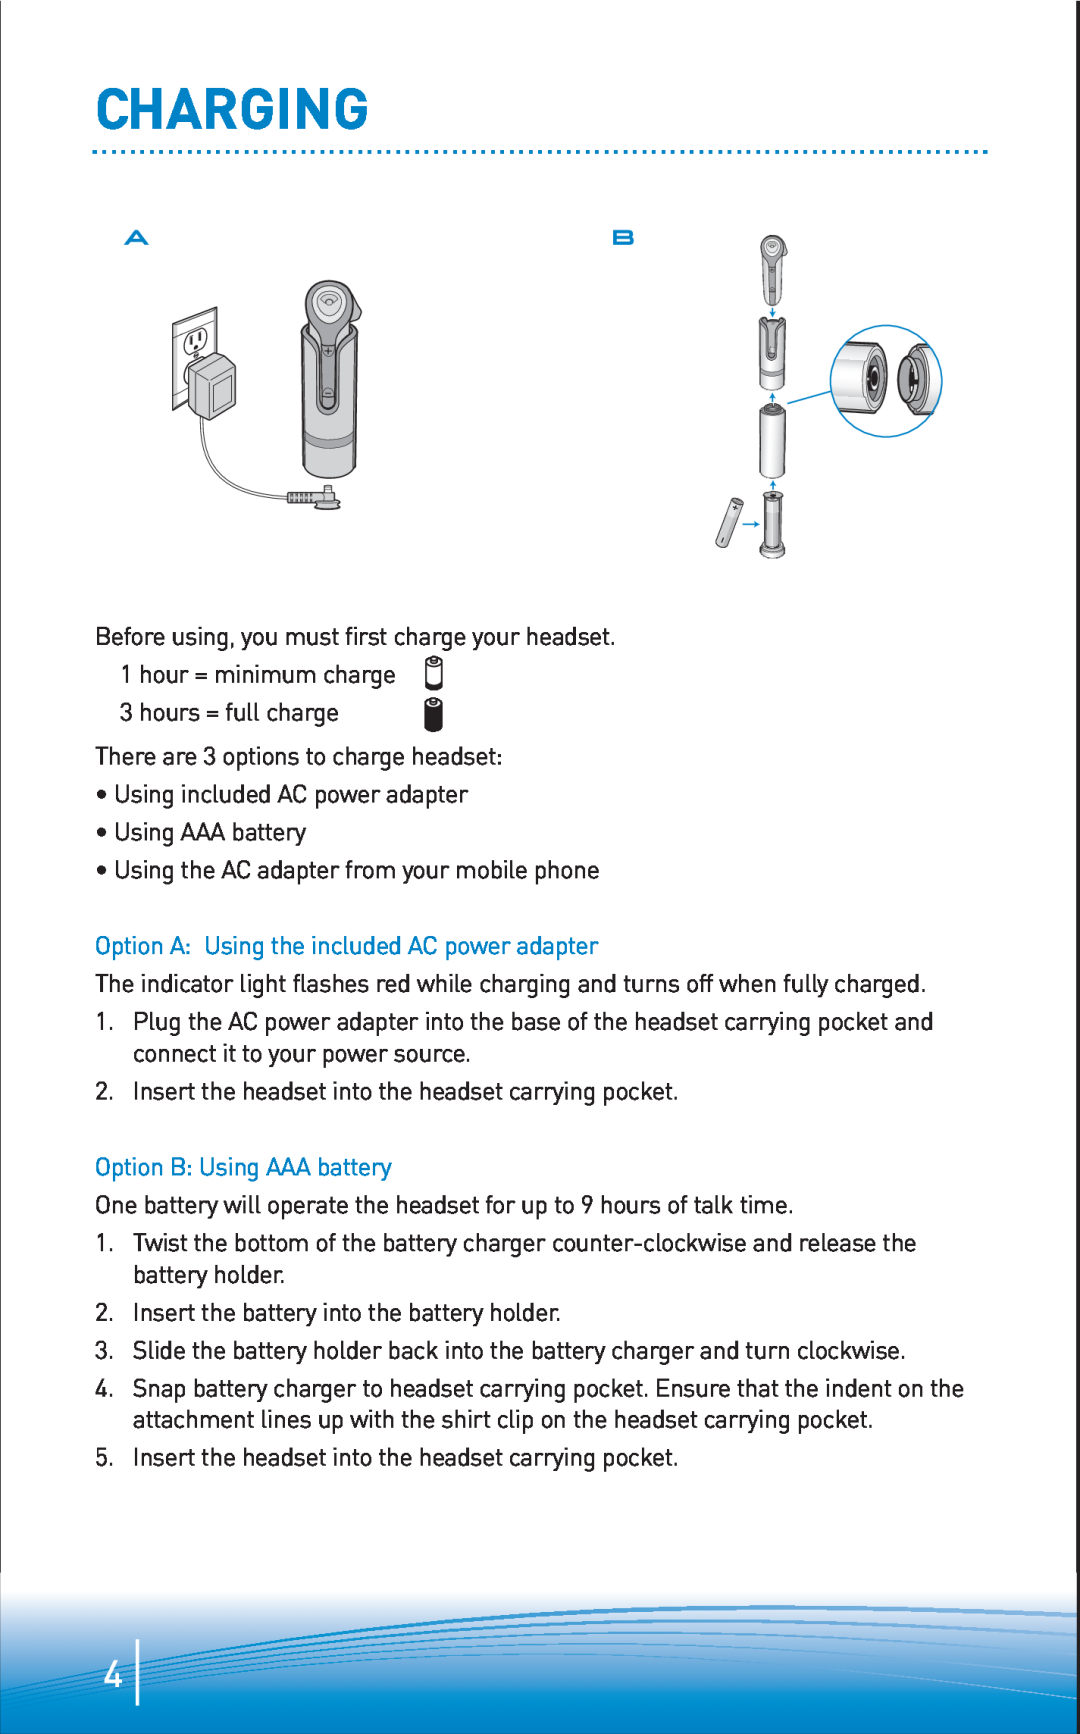 Plantronics 645 manual Charging, Option A Using the included AC power adapter, Option B Using AAA battery 